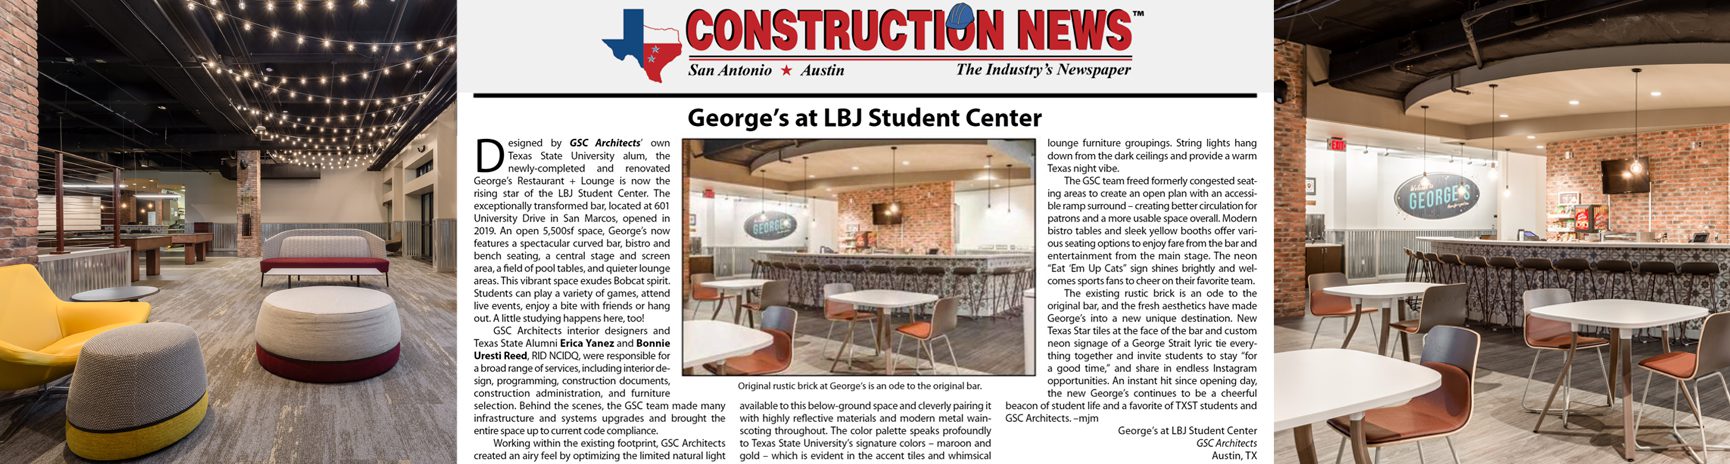 Georges at the LBJ Center Project Spotlight in Construction News